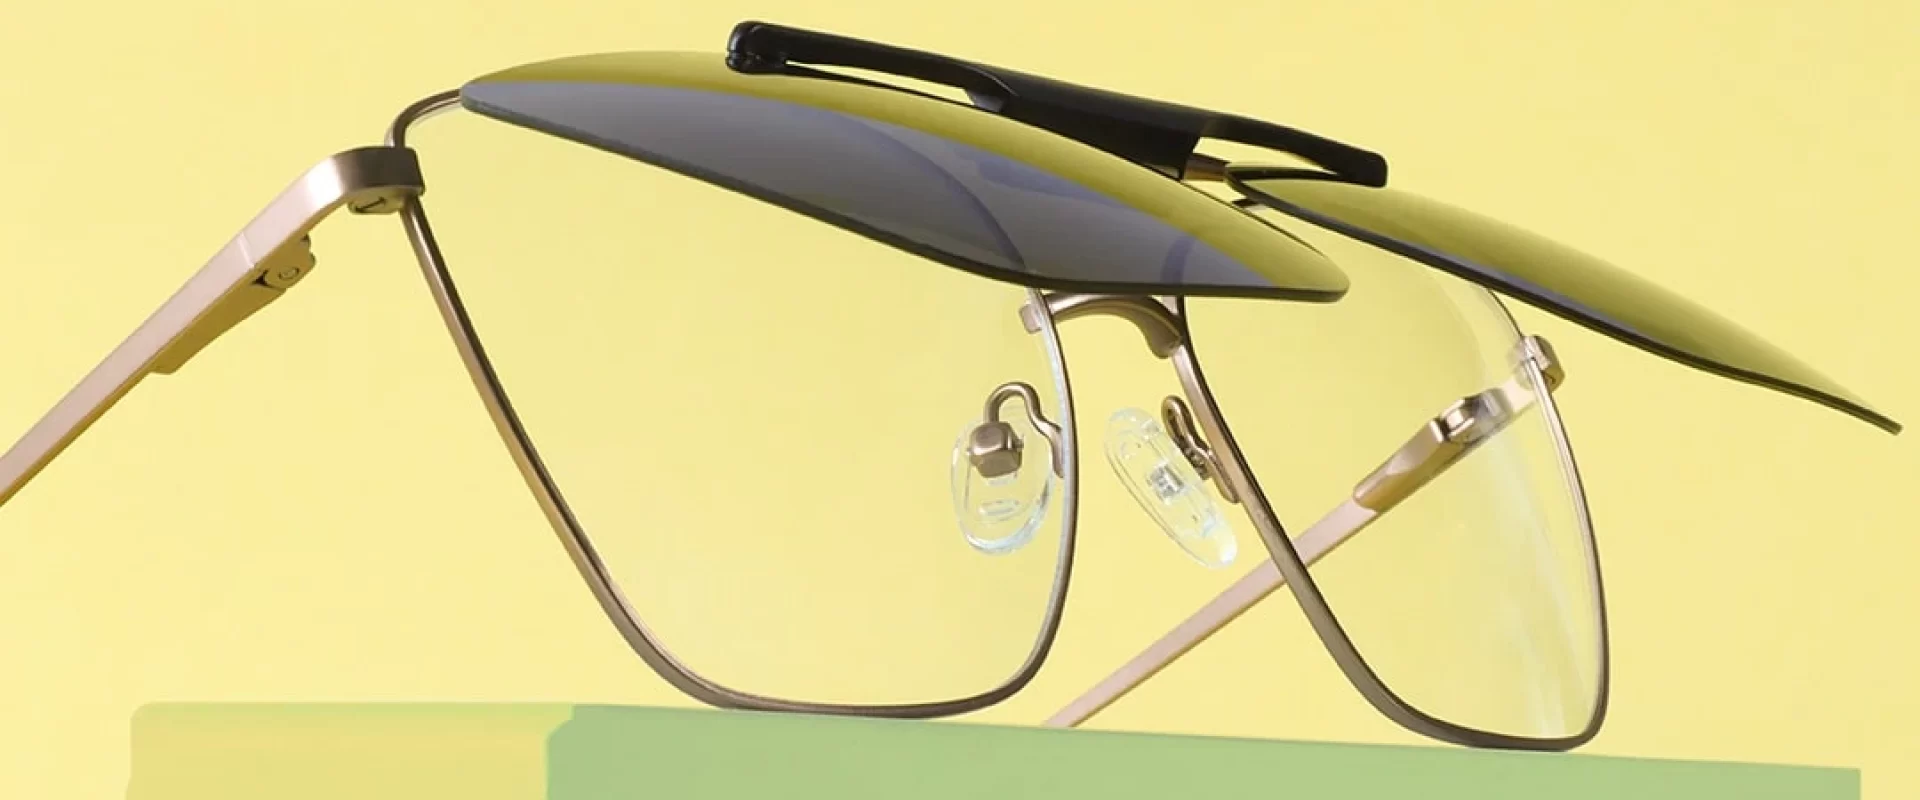 EO Eyewear’s clip-on collection